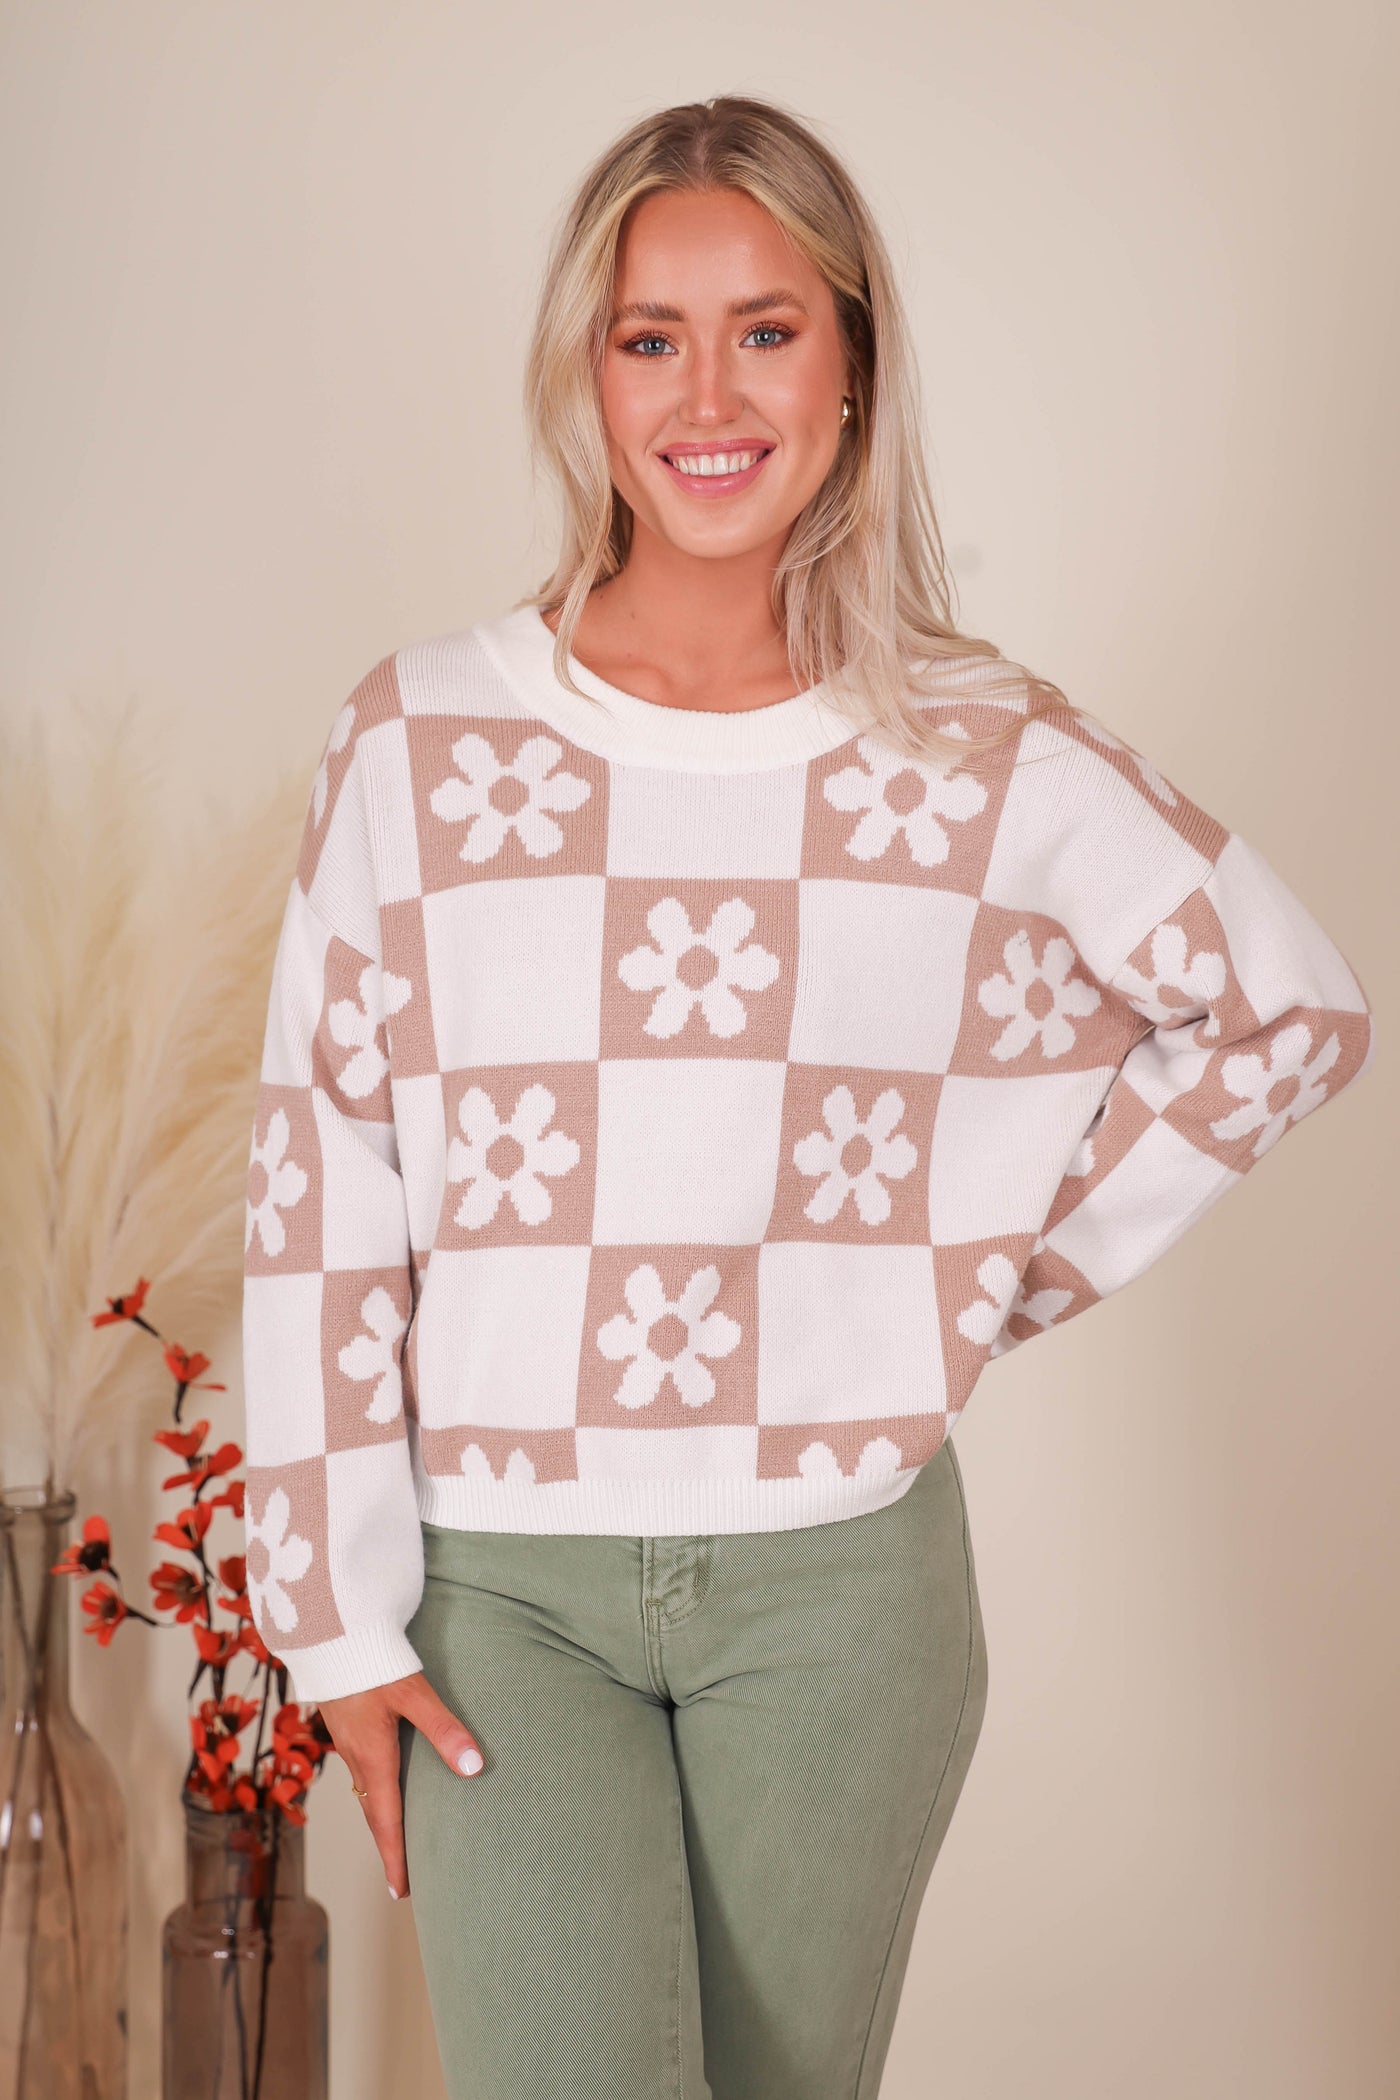 Miracle Flower Sweater for Women in Grey